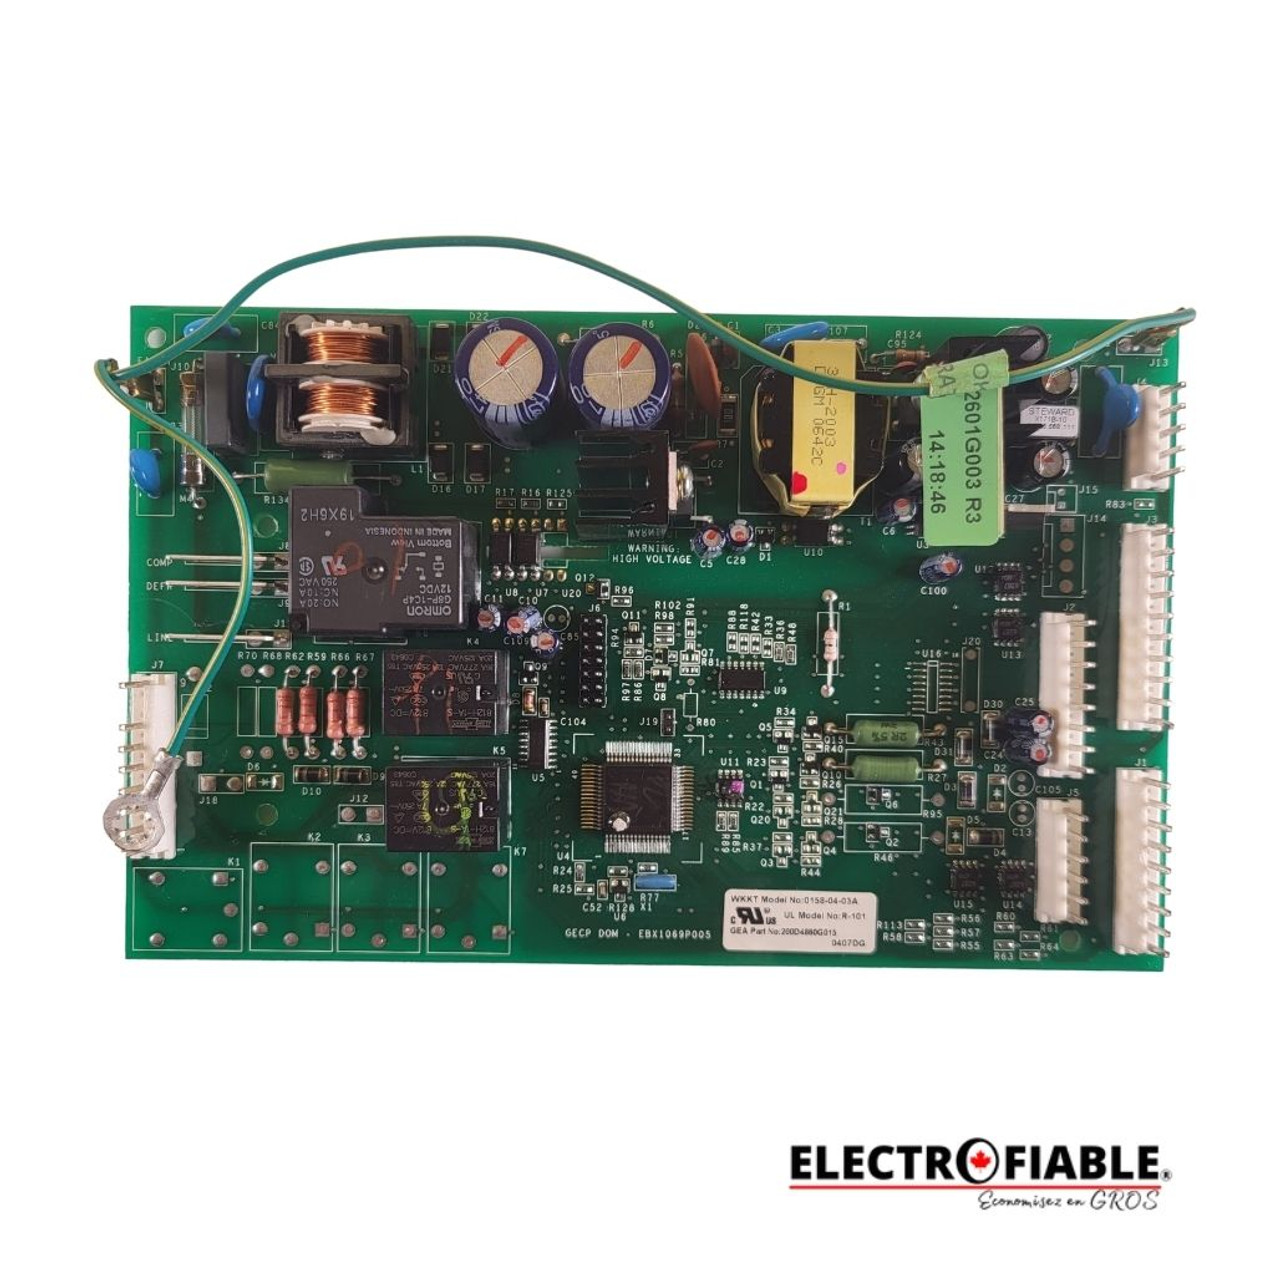 200D4860G015 Control board for GE refrigerator